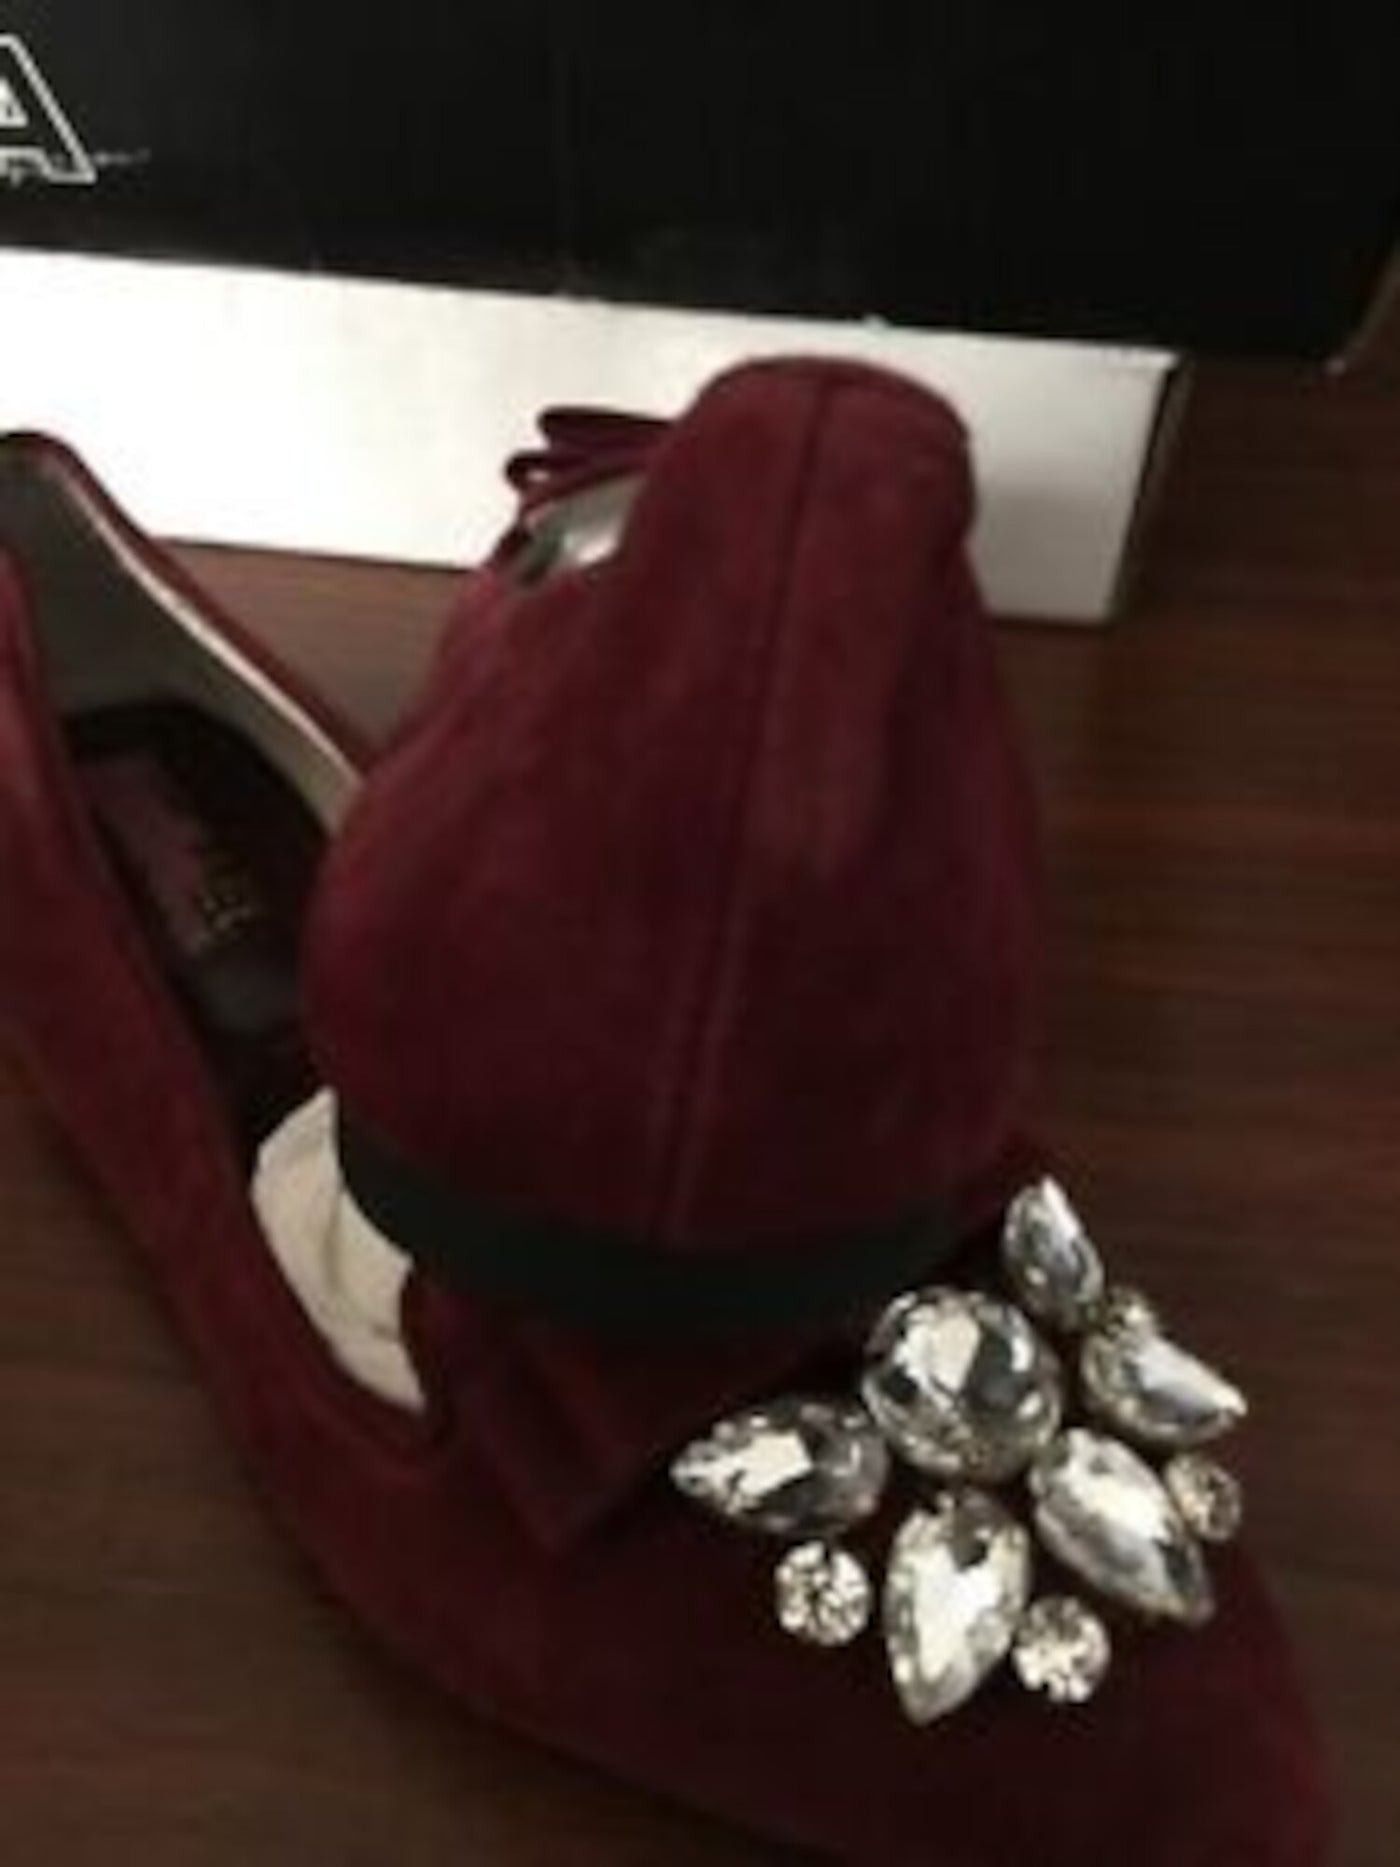 MICHAEL KORS Womens Merlot Burgundy Bow Accent Embellished Felicity Pointed Toe Slip On Leather Flats Shoes 8.5 M